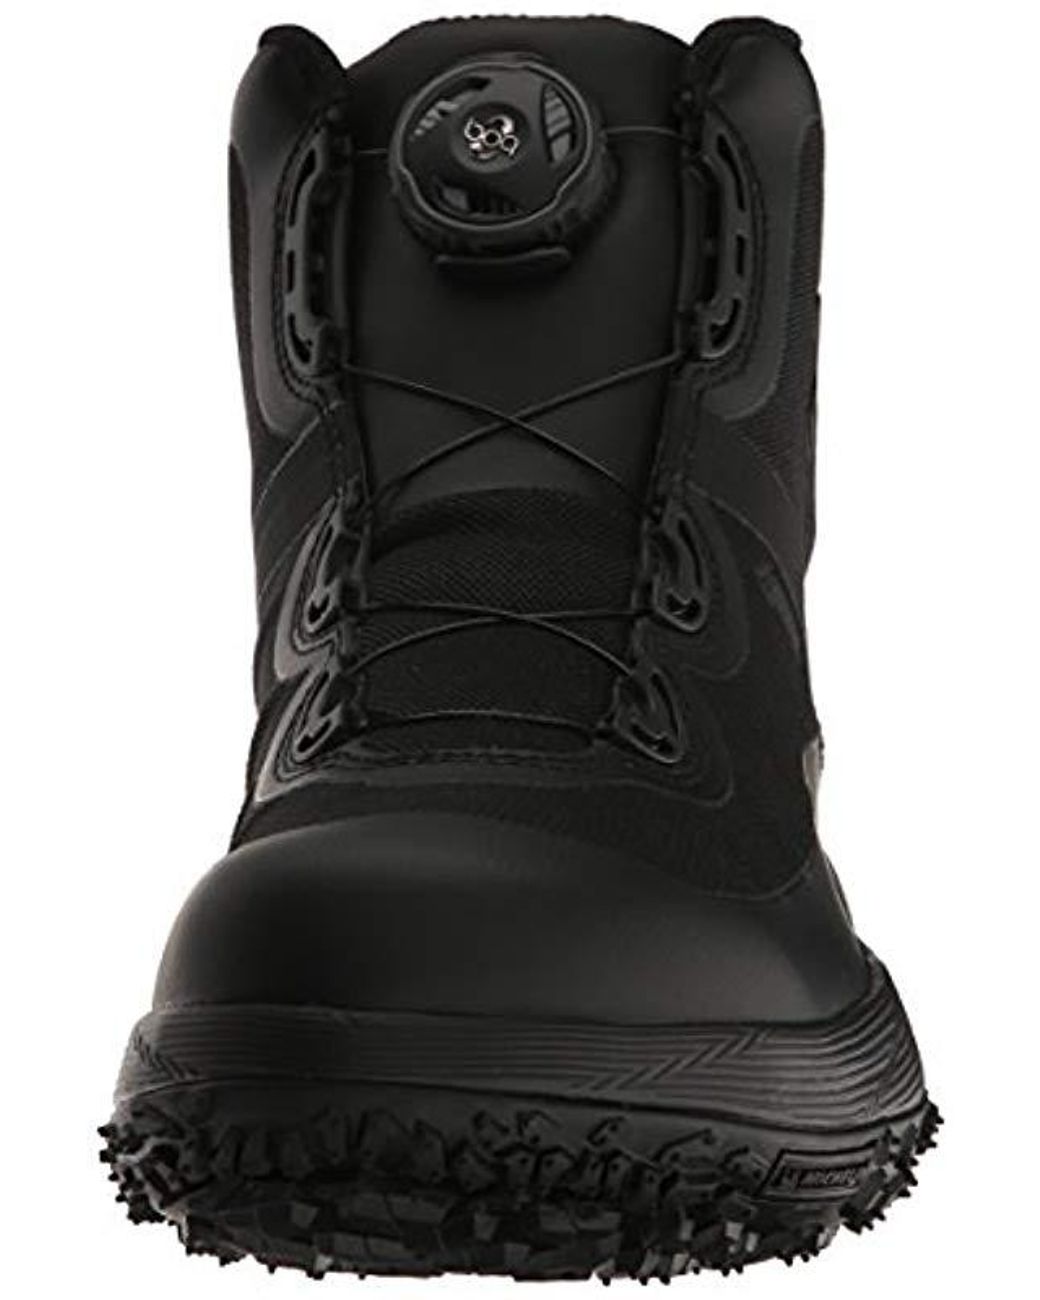 Under Armour Fat Tire Gtx Military Boots Uk 12 Black for Men | Lyst UK